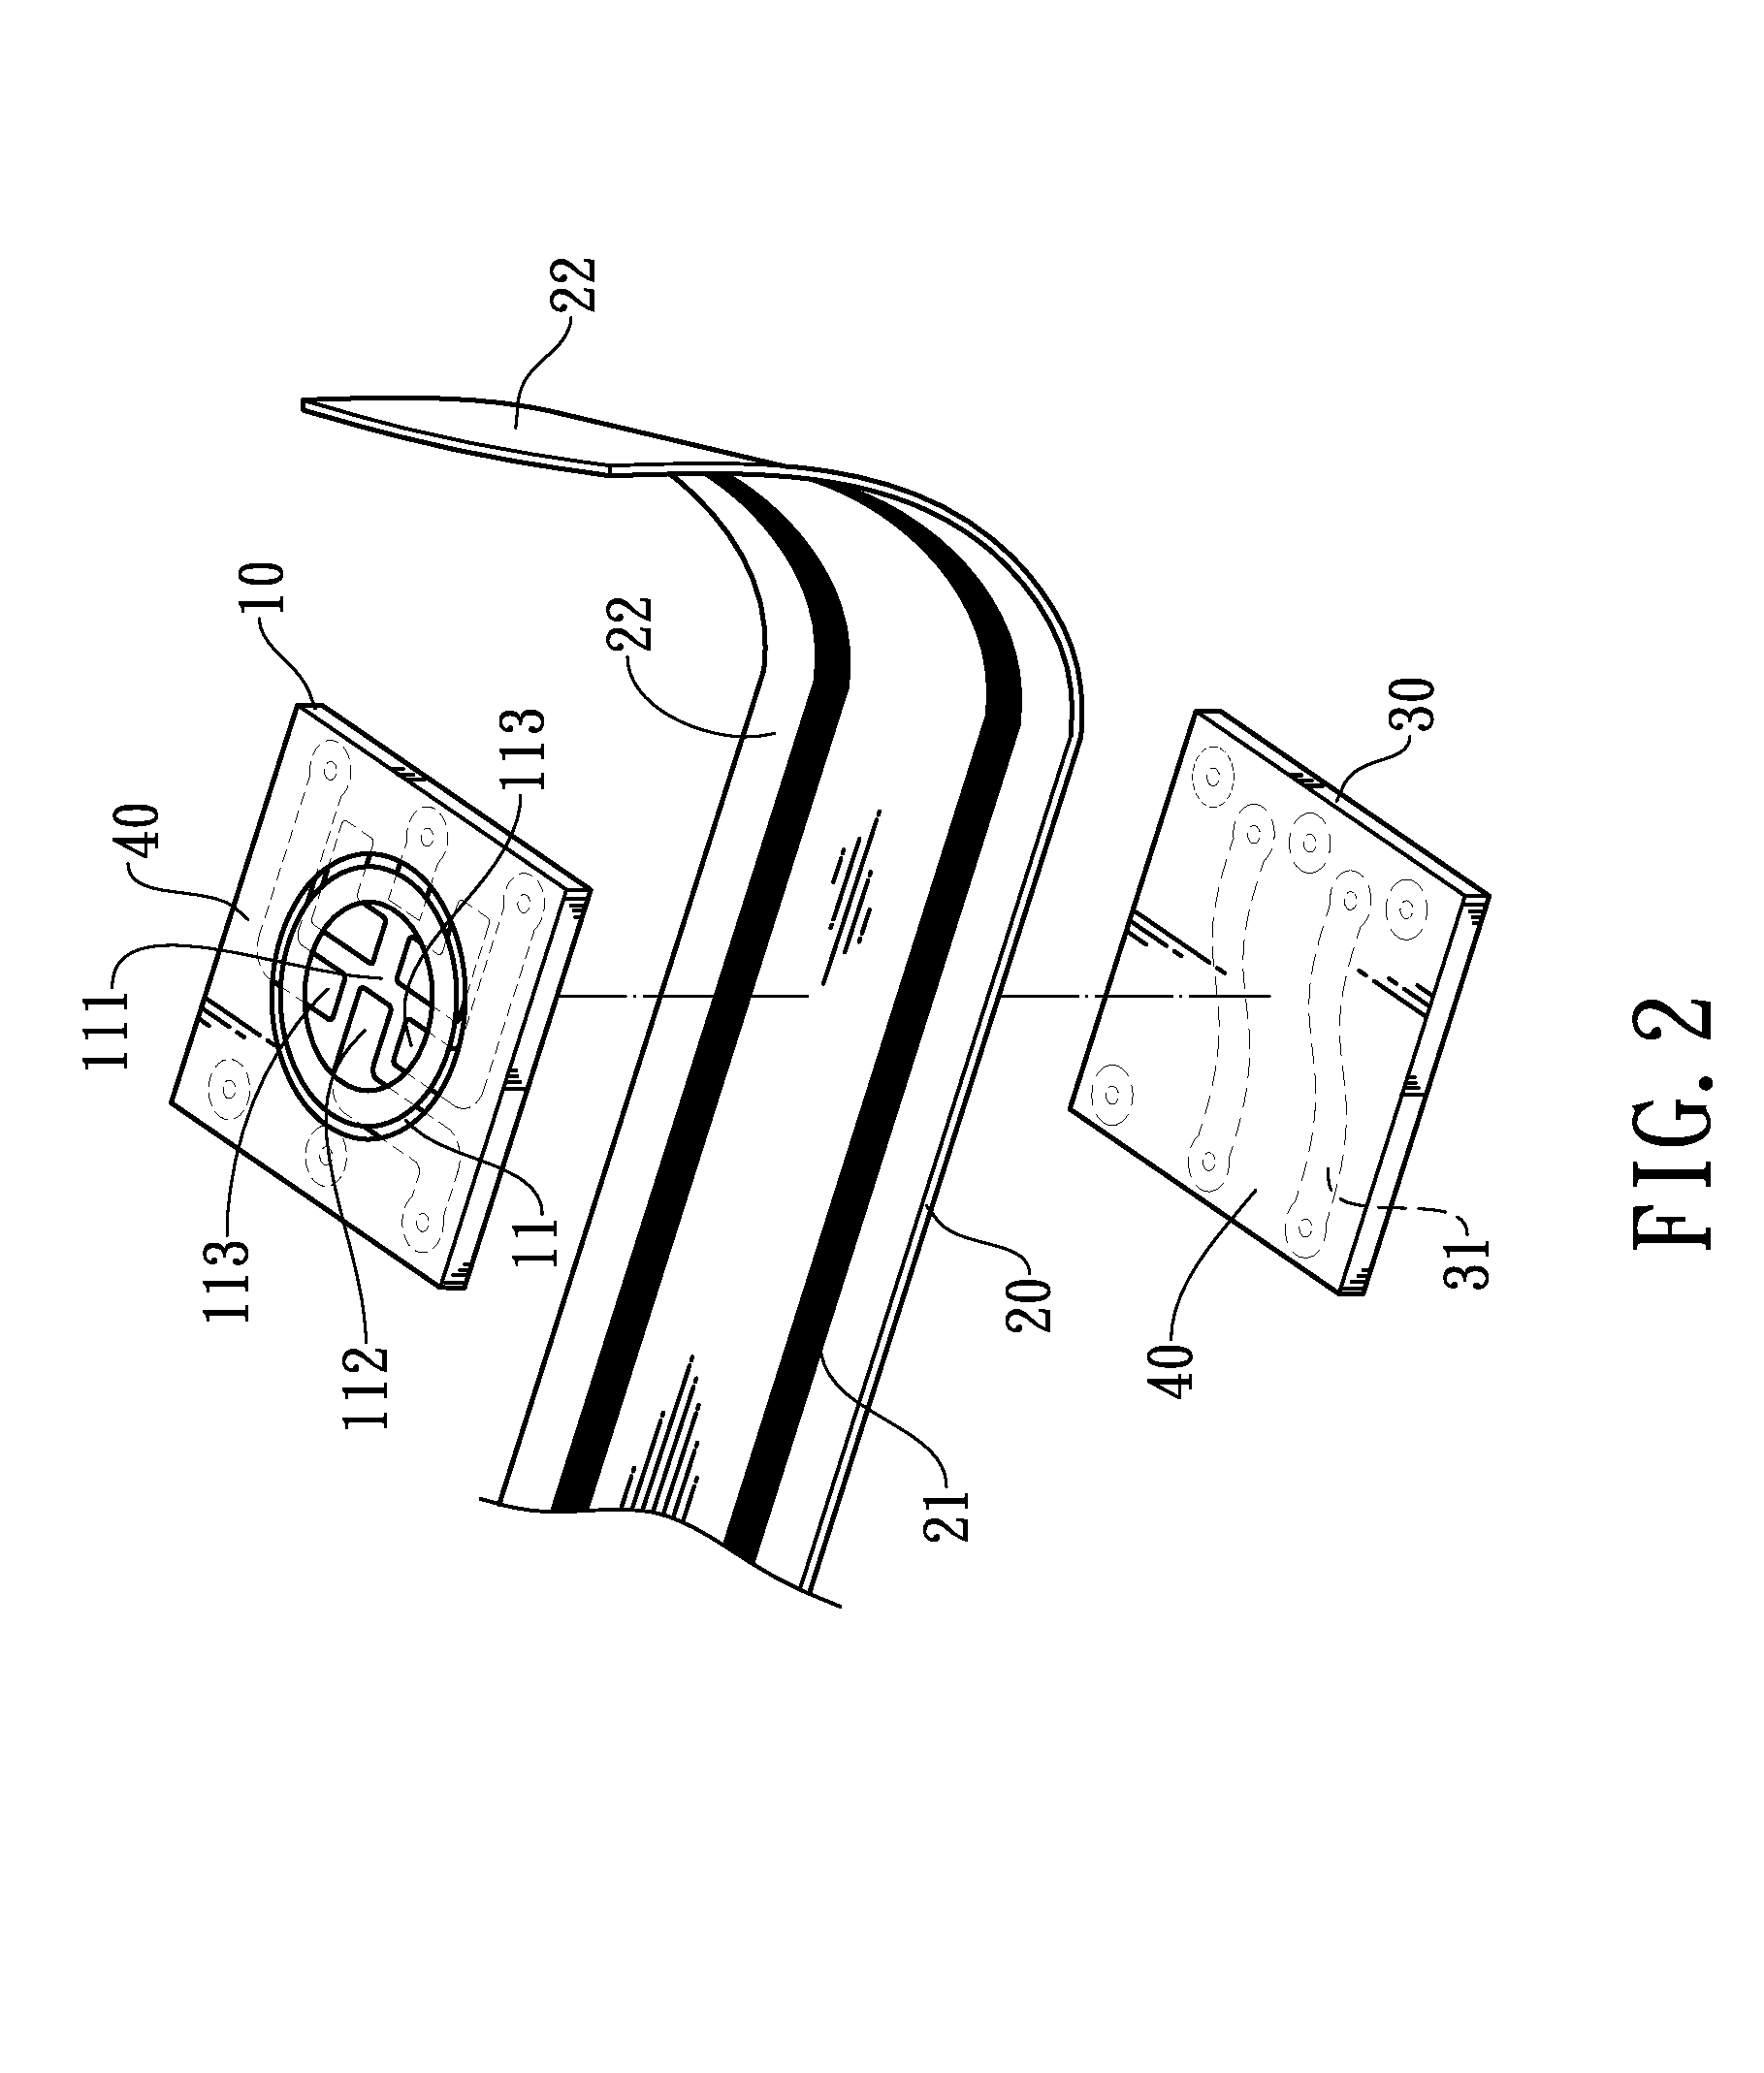 Substrate structrue for light-emitting diode